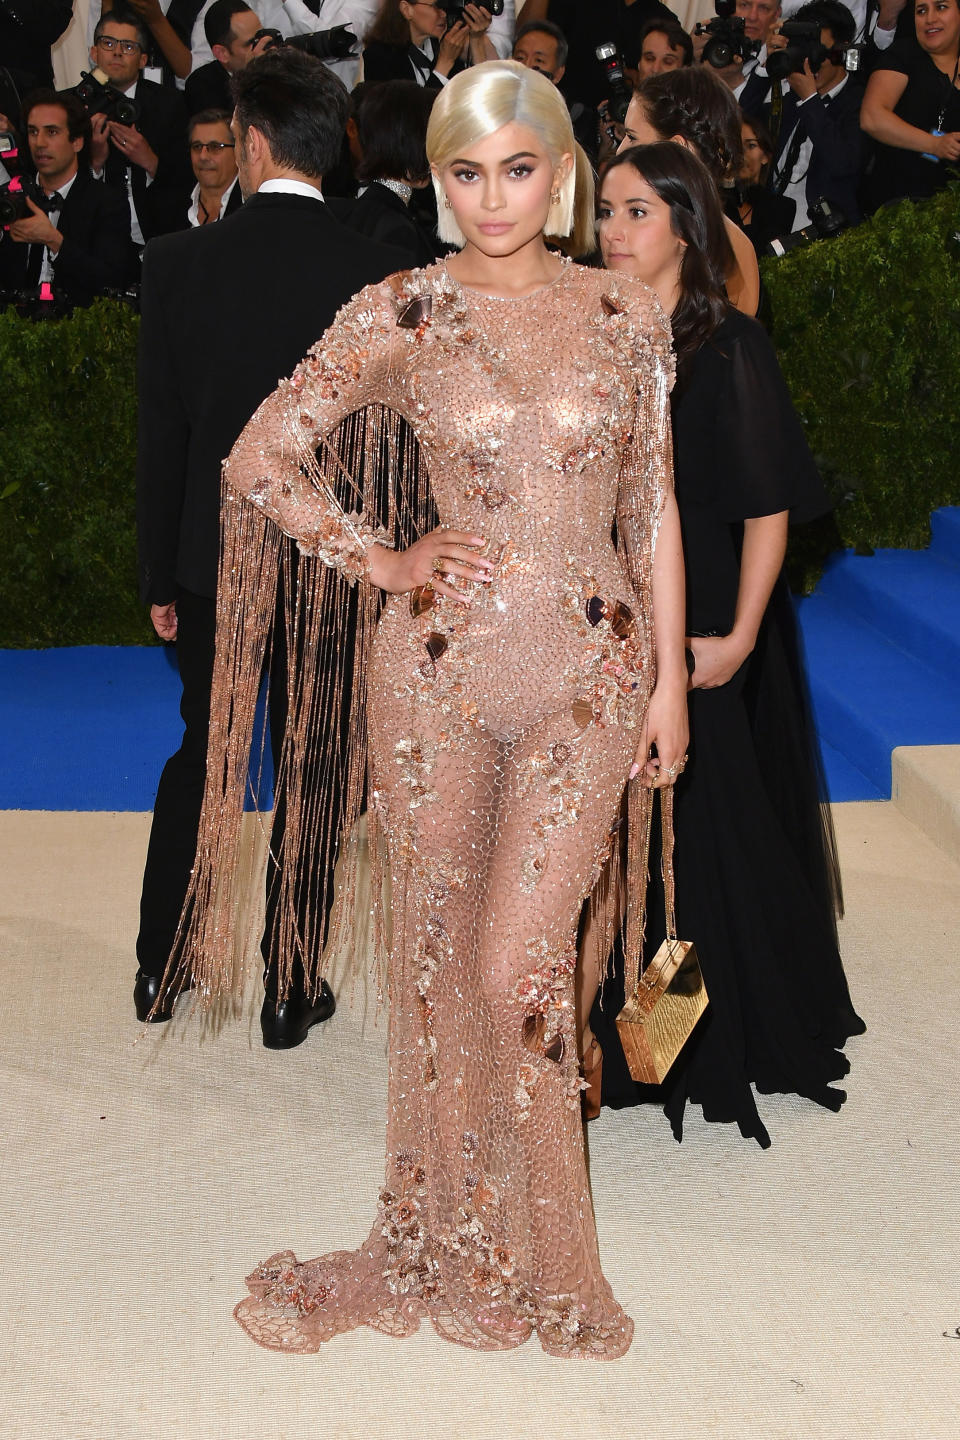 In a sparkly transparent gown and bodysuit at the Met Gala